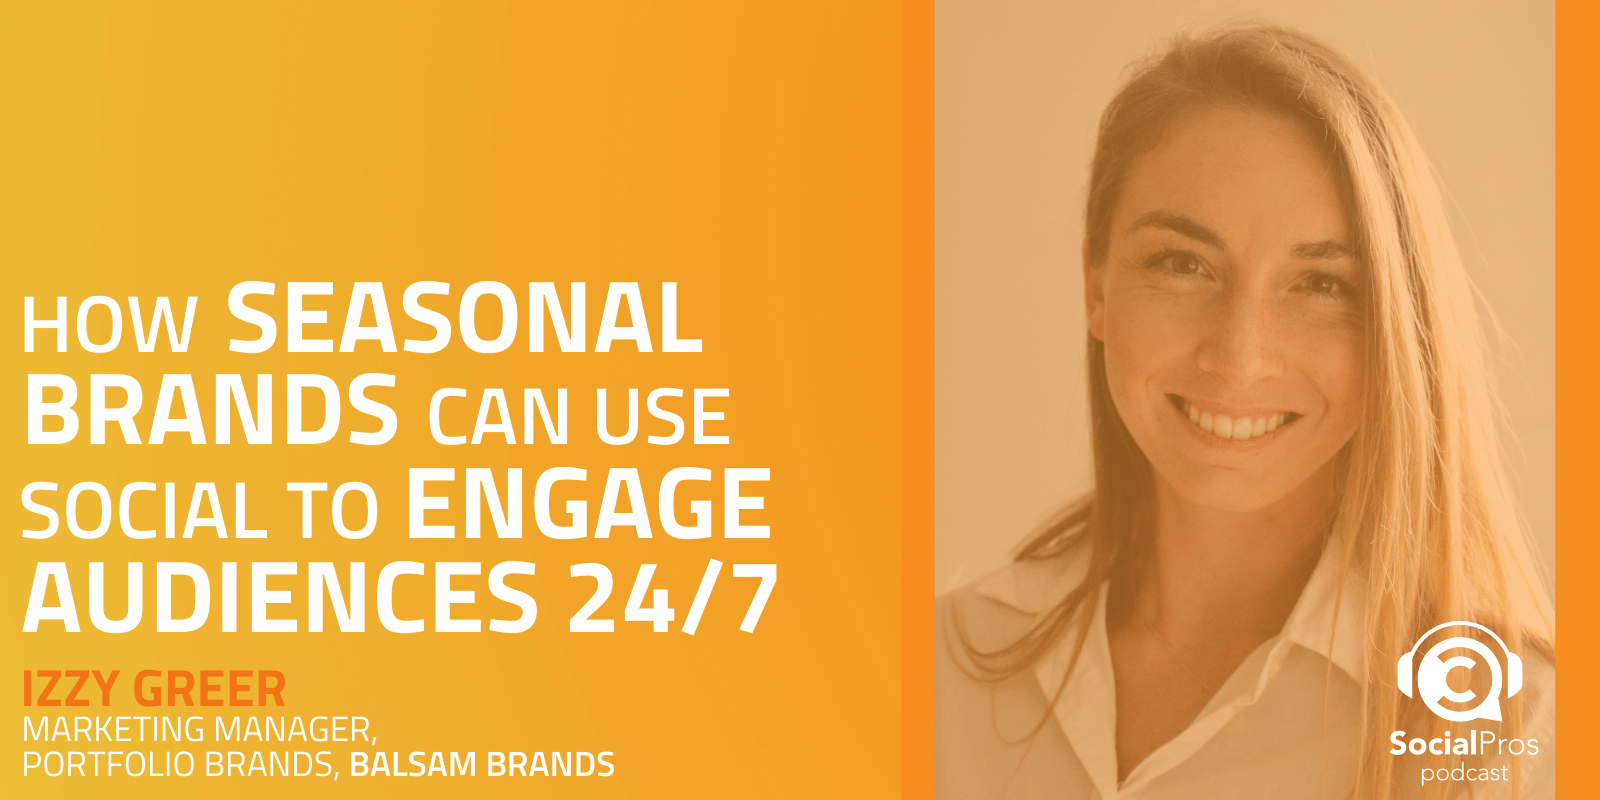 How Seasonal Brands Can Use Social to Engage Audiences 24/7